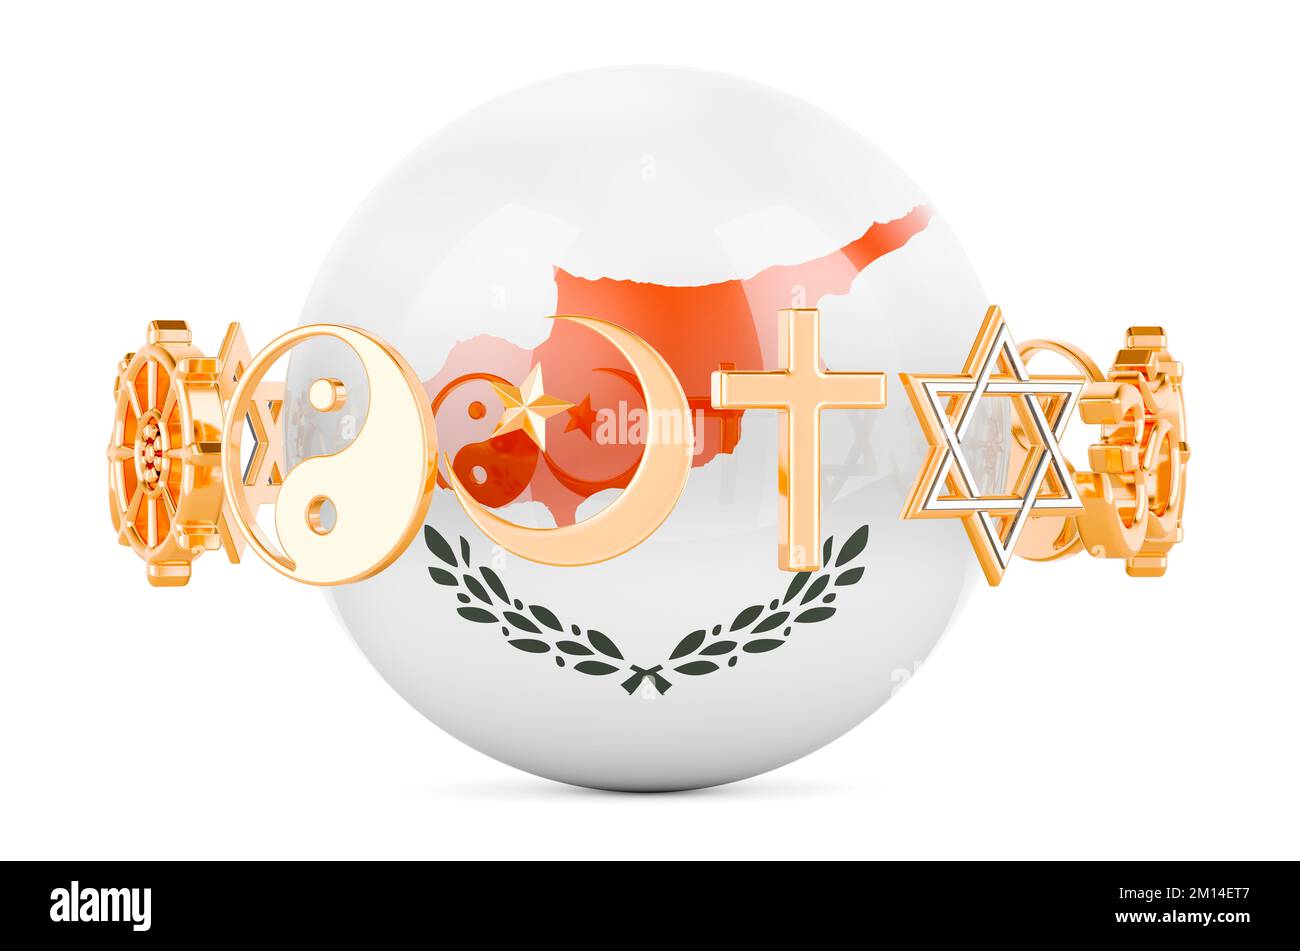 Cypriot flag painted on sphere with religions symbols around, 3D rendering isolated on white background Stock Photo